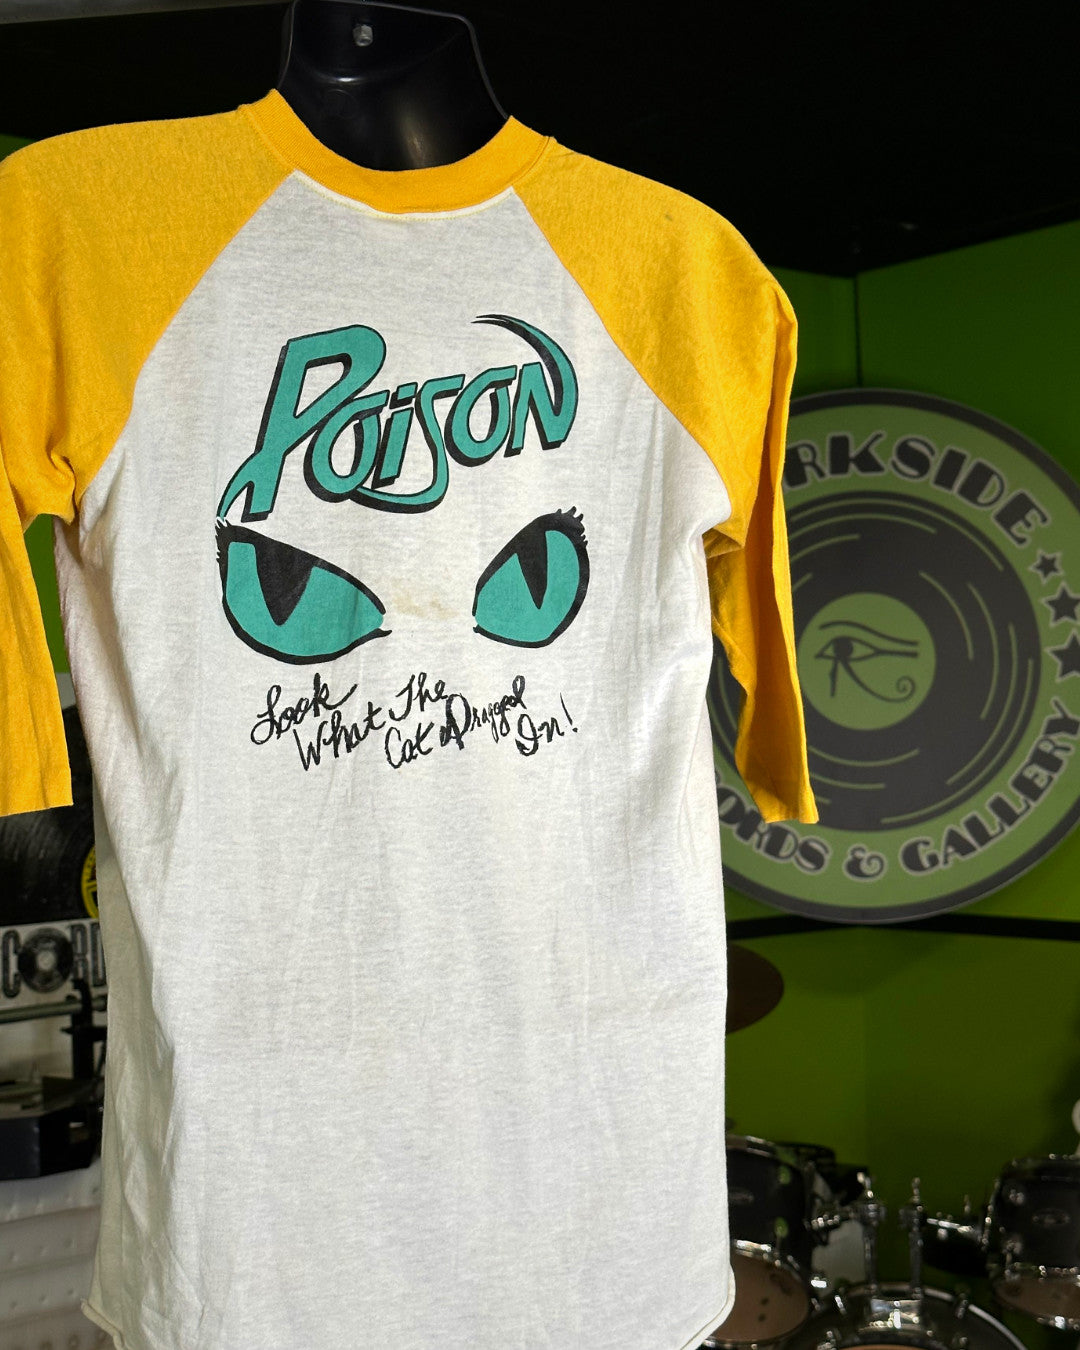 Poison 1986 Look What The Cat Dragged In Raglan/Baseball T-Shirt, White w/Yellow Arms, M (Tagged XL)(Measures 26” Waist, 28” Long, 19” Pit To Pit) - Darkside Records